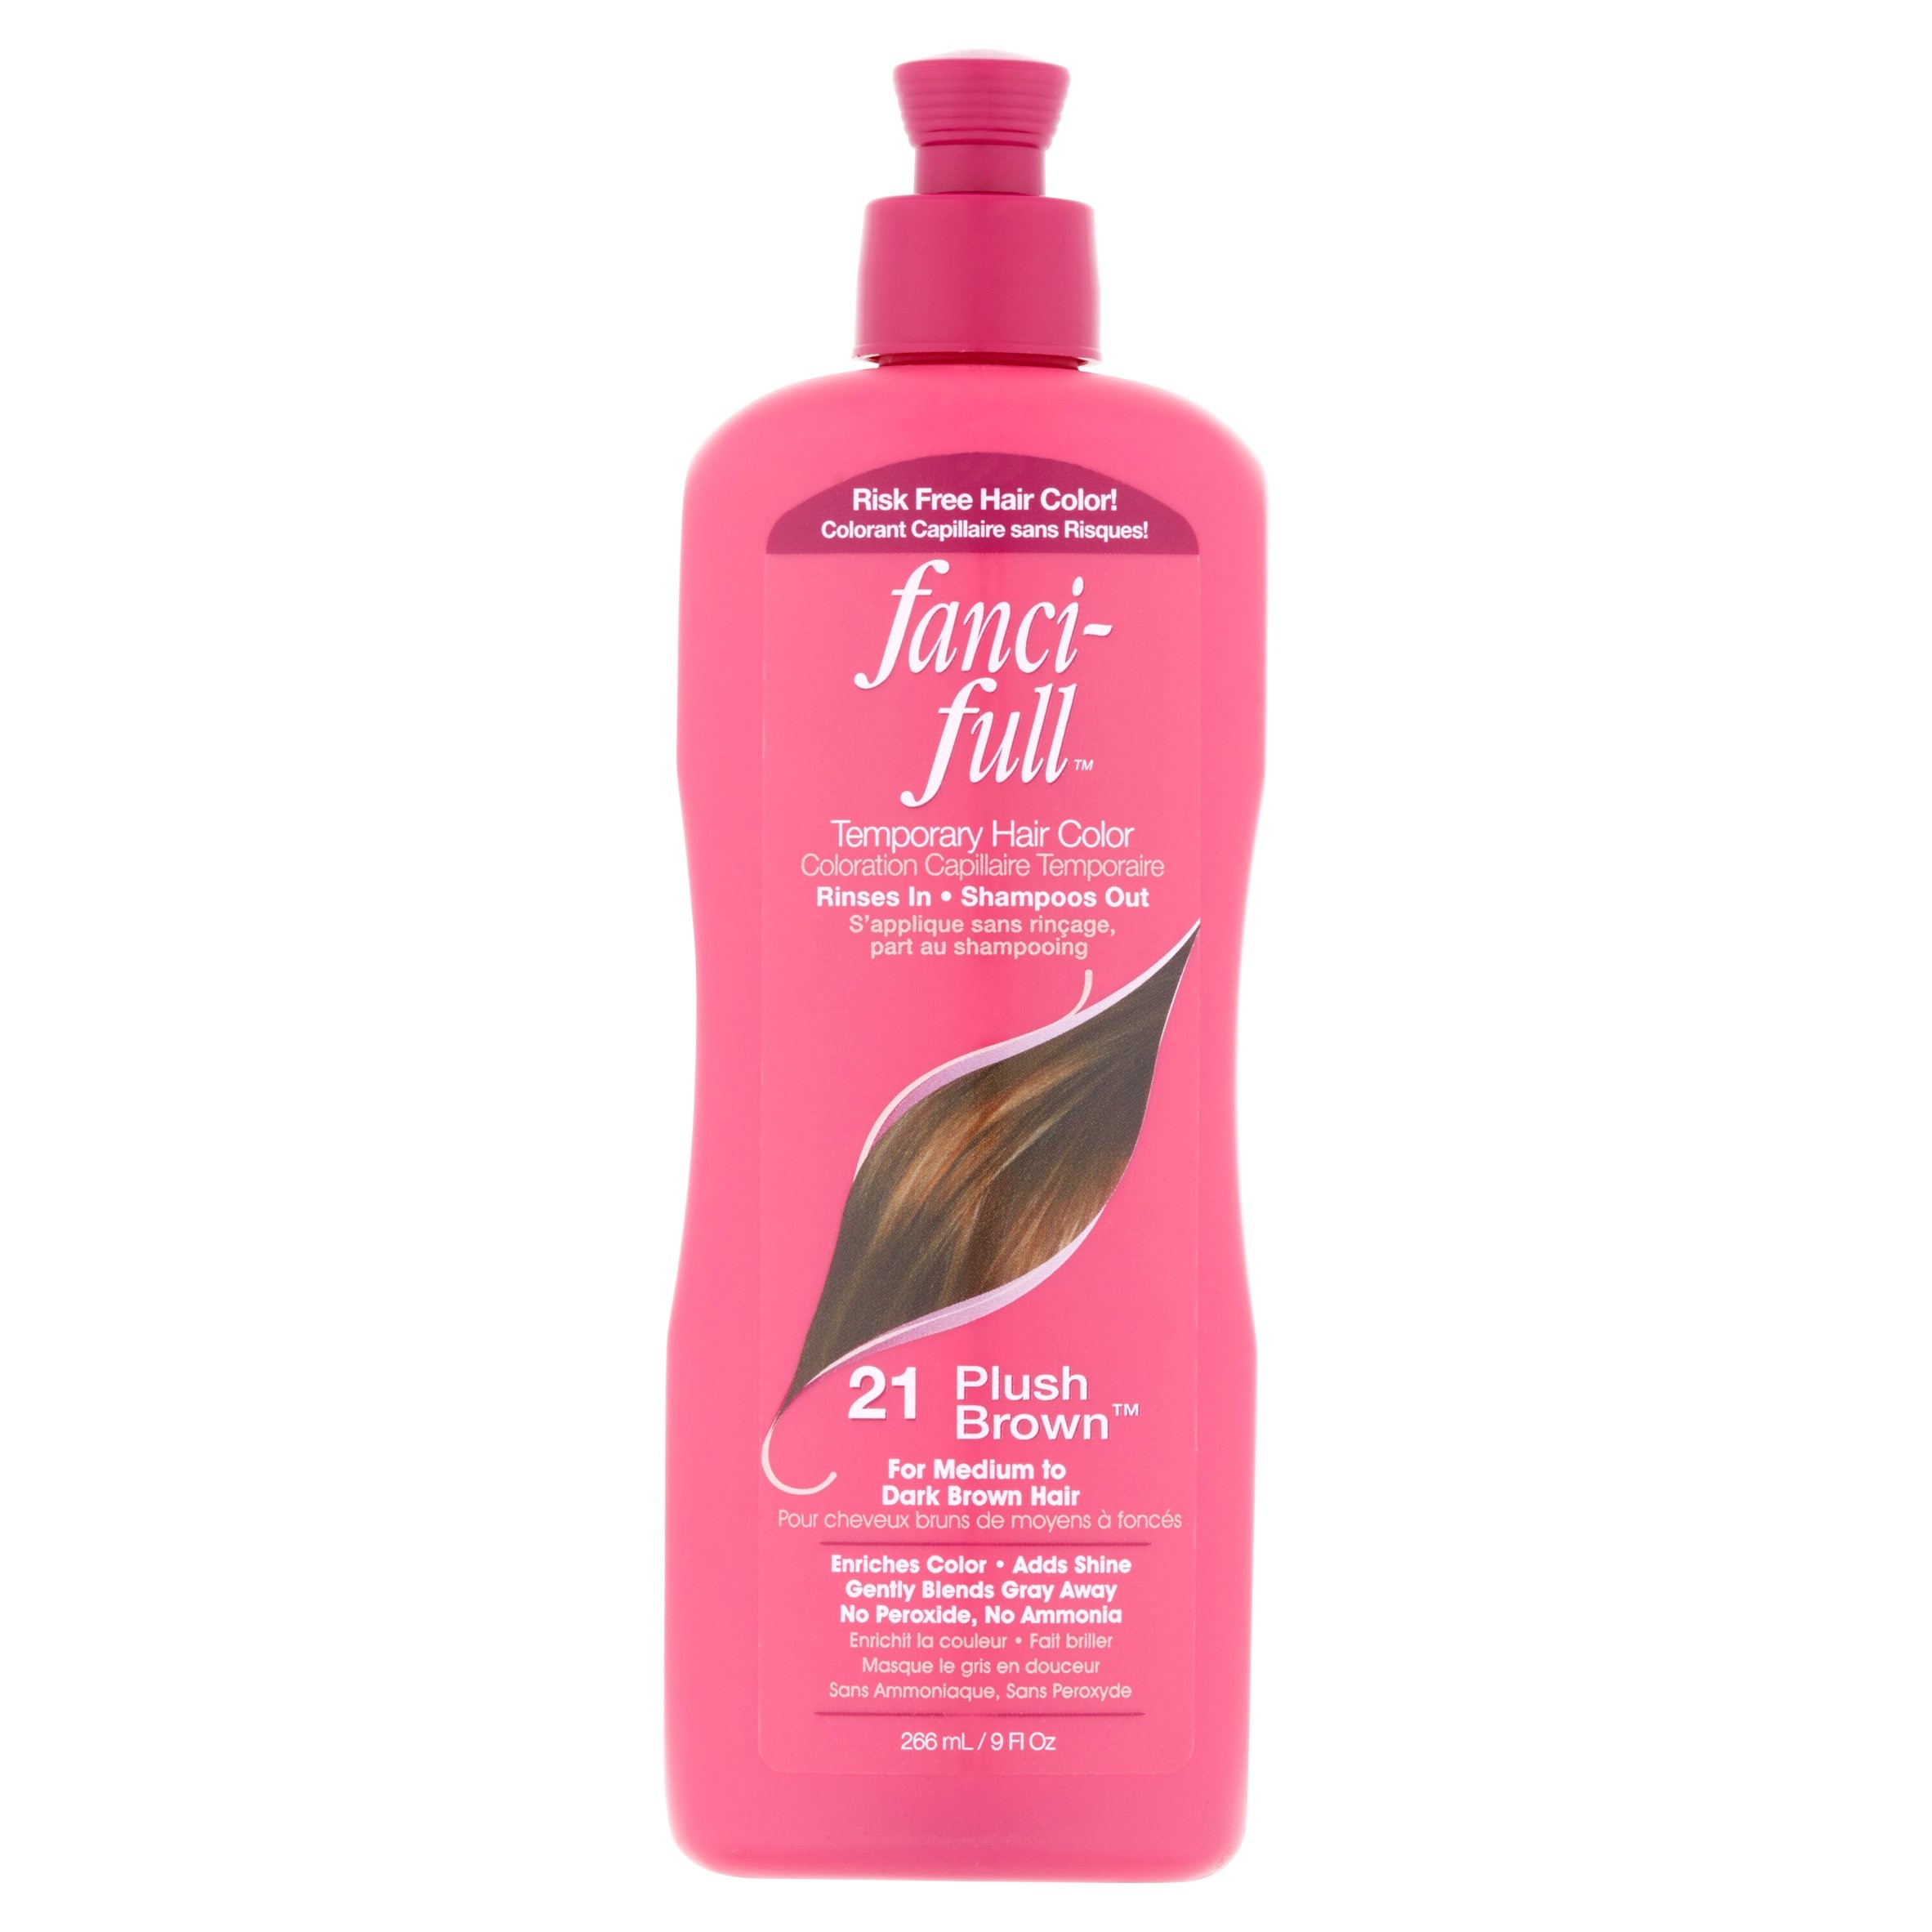 Fancifull 21 Plush Brown Temporary Hair Color, 9 Fl Oz - image 1 of 5